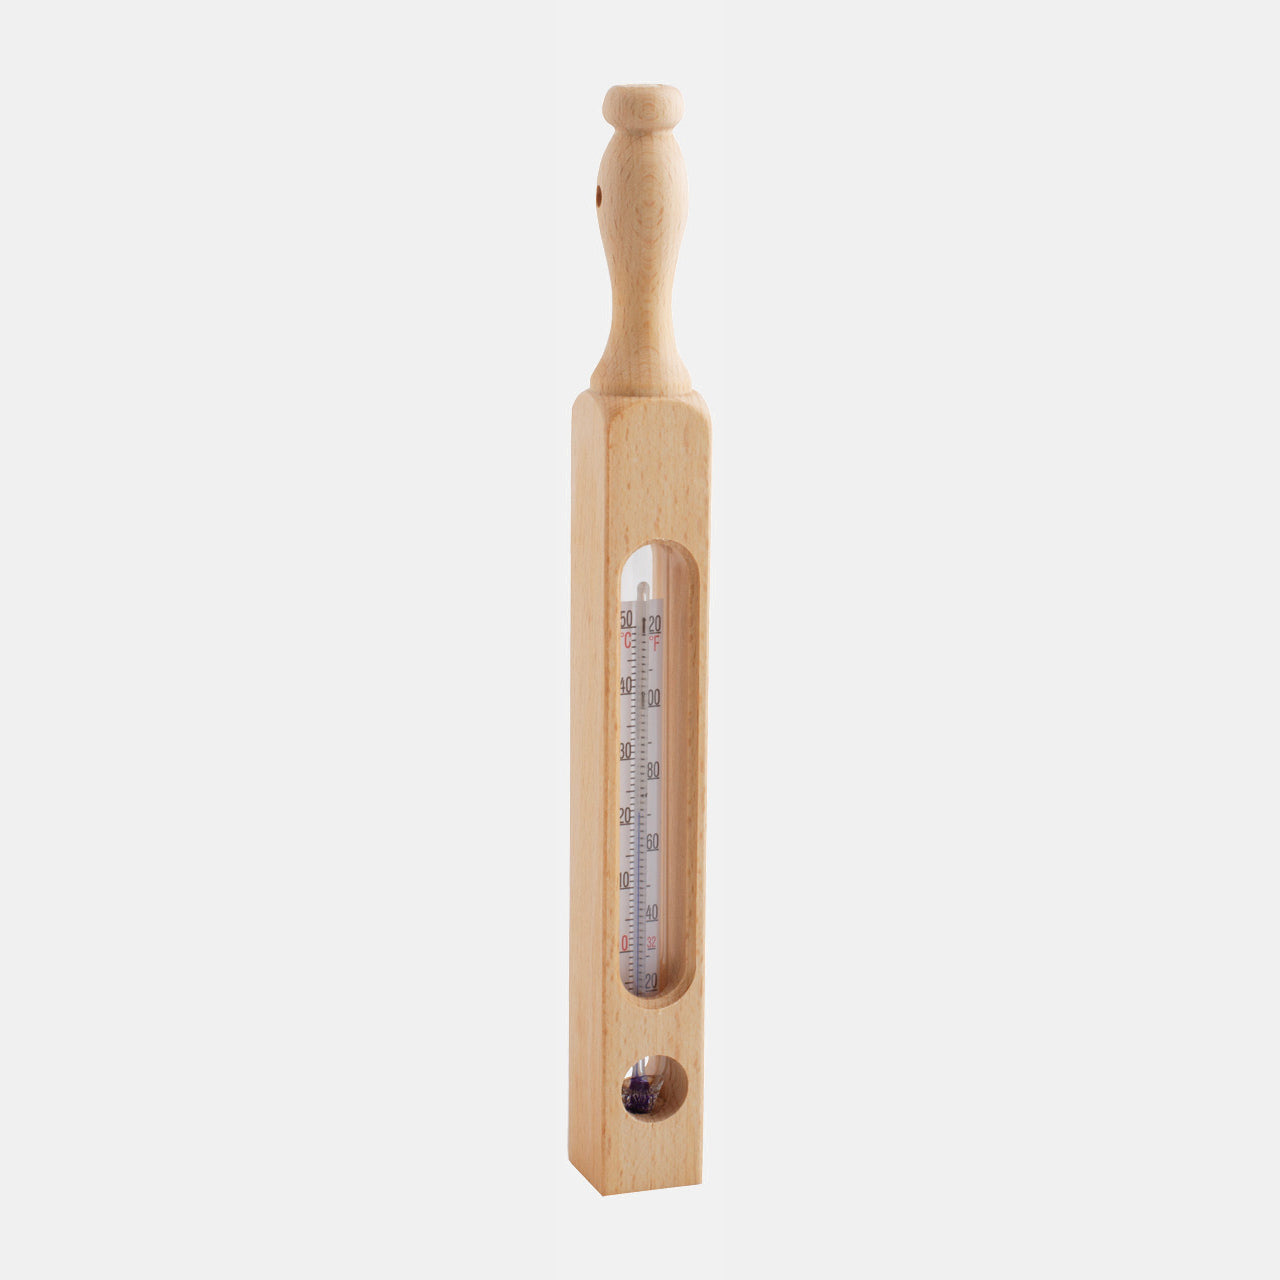 Wooden Bath Thermometer